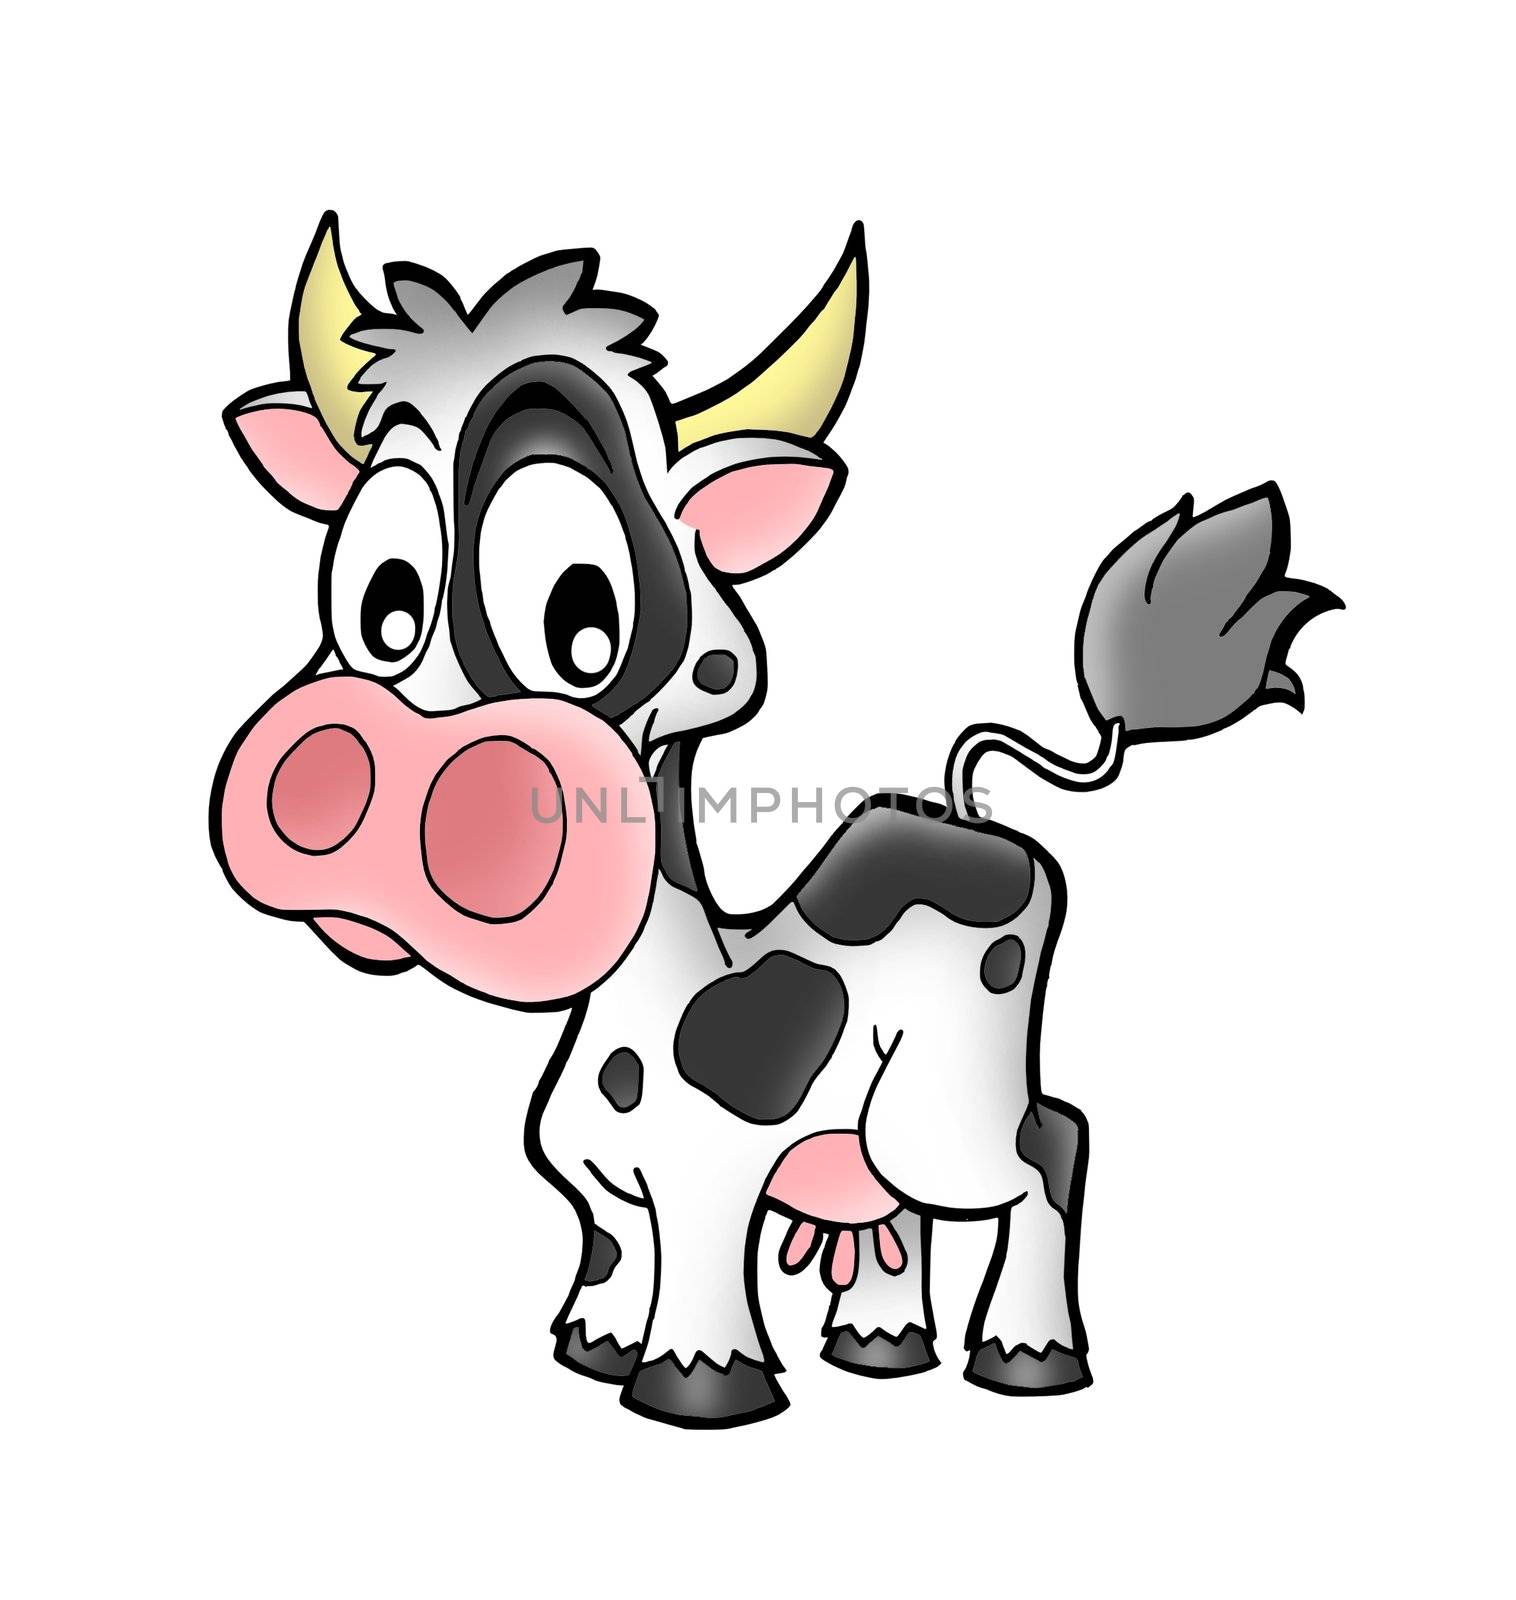 Small cow by clairev